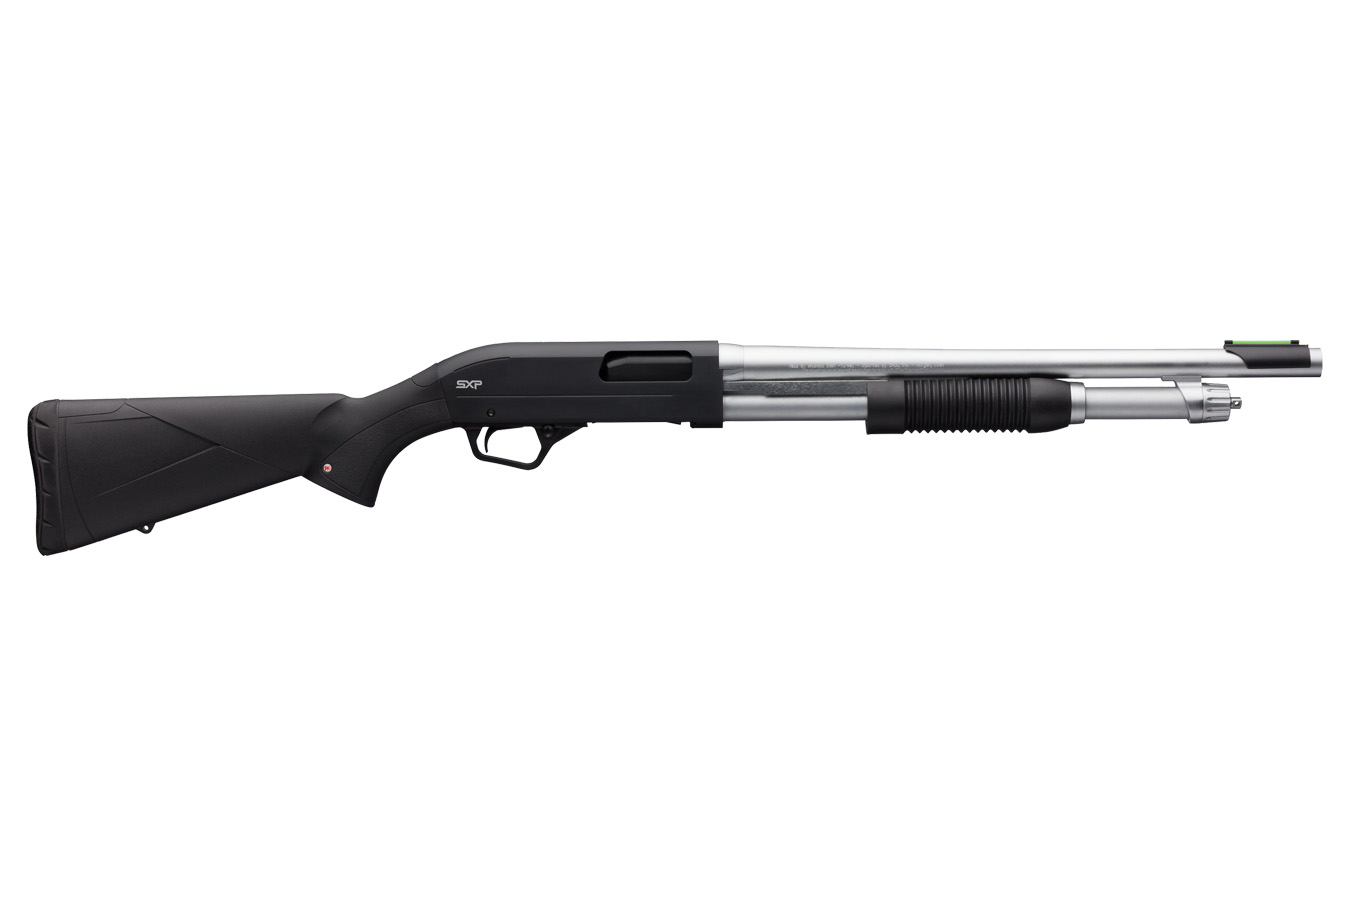 No. 12 Best Selling: WINCHESTER FIREARMS SXP MARINE DEFENDER 12 GA 18`` BBL